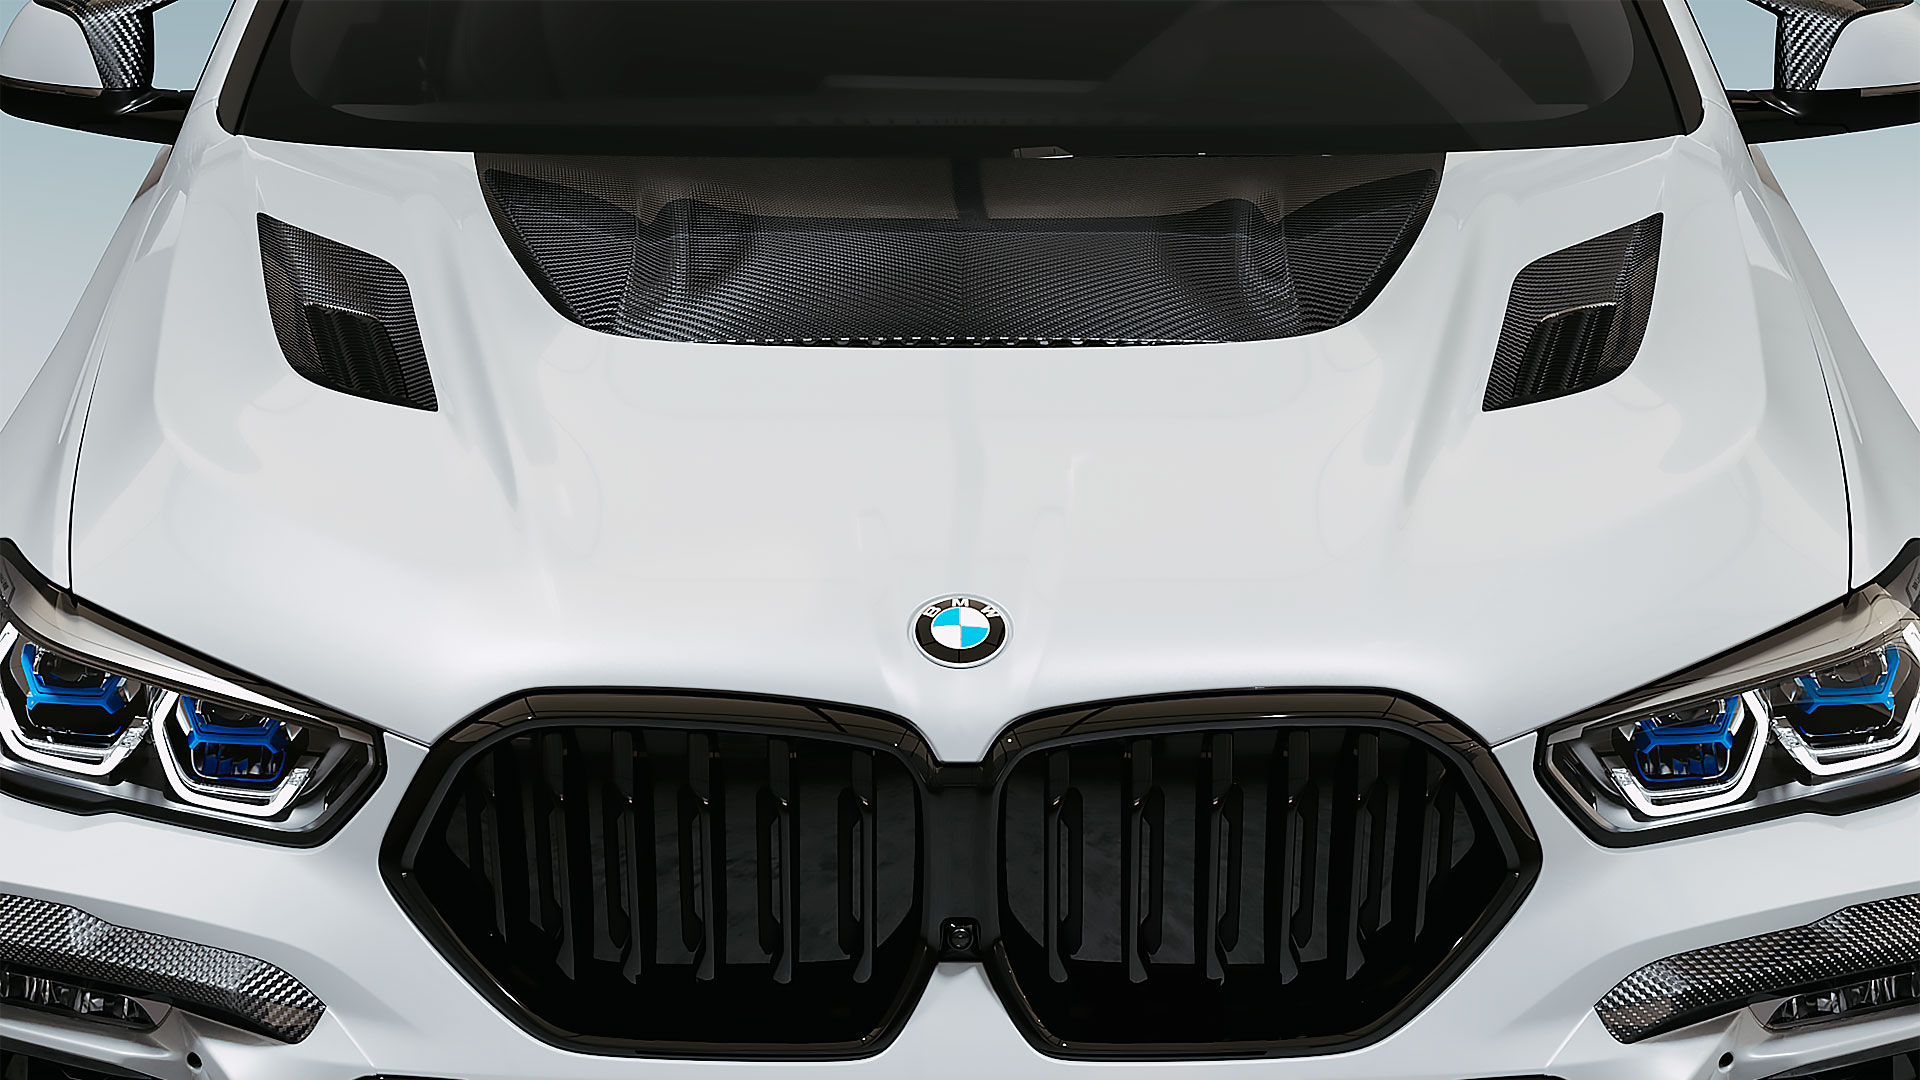 Check our price and buy Khann carbon fiber body kit set for BMW X6 G06!